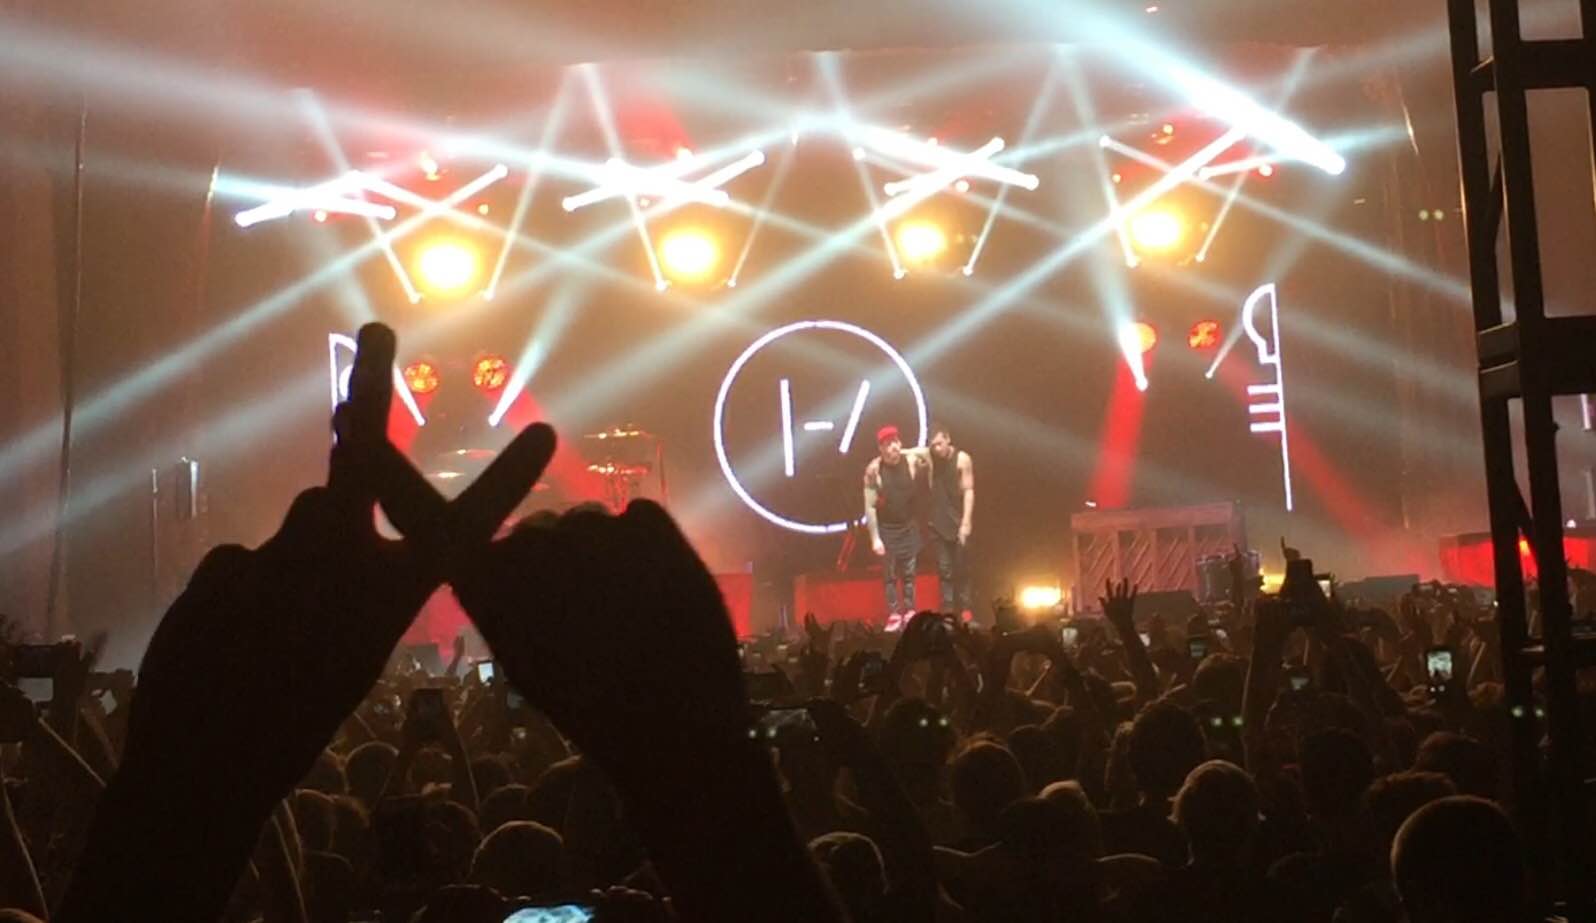 Twenty One Pilots connects with fans at Aragon Ballroom